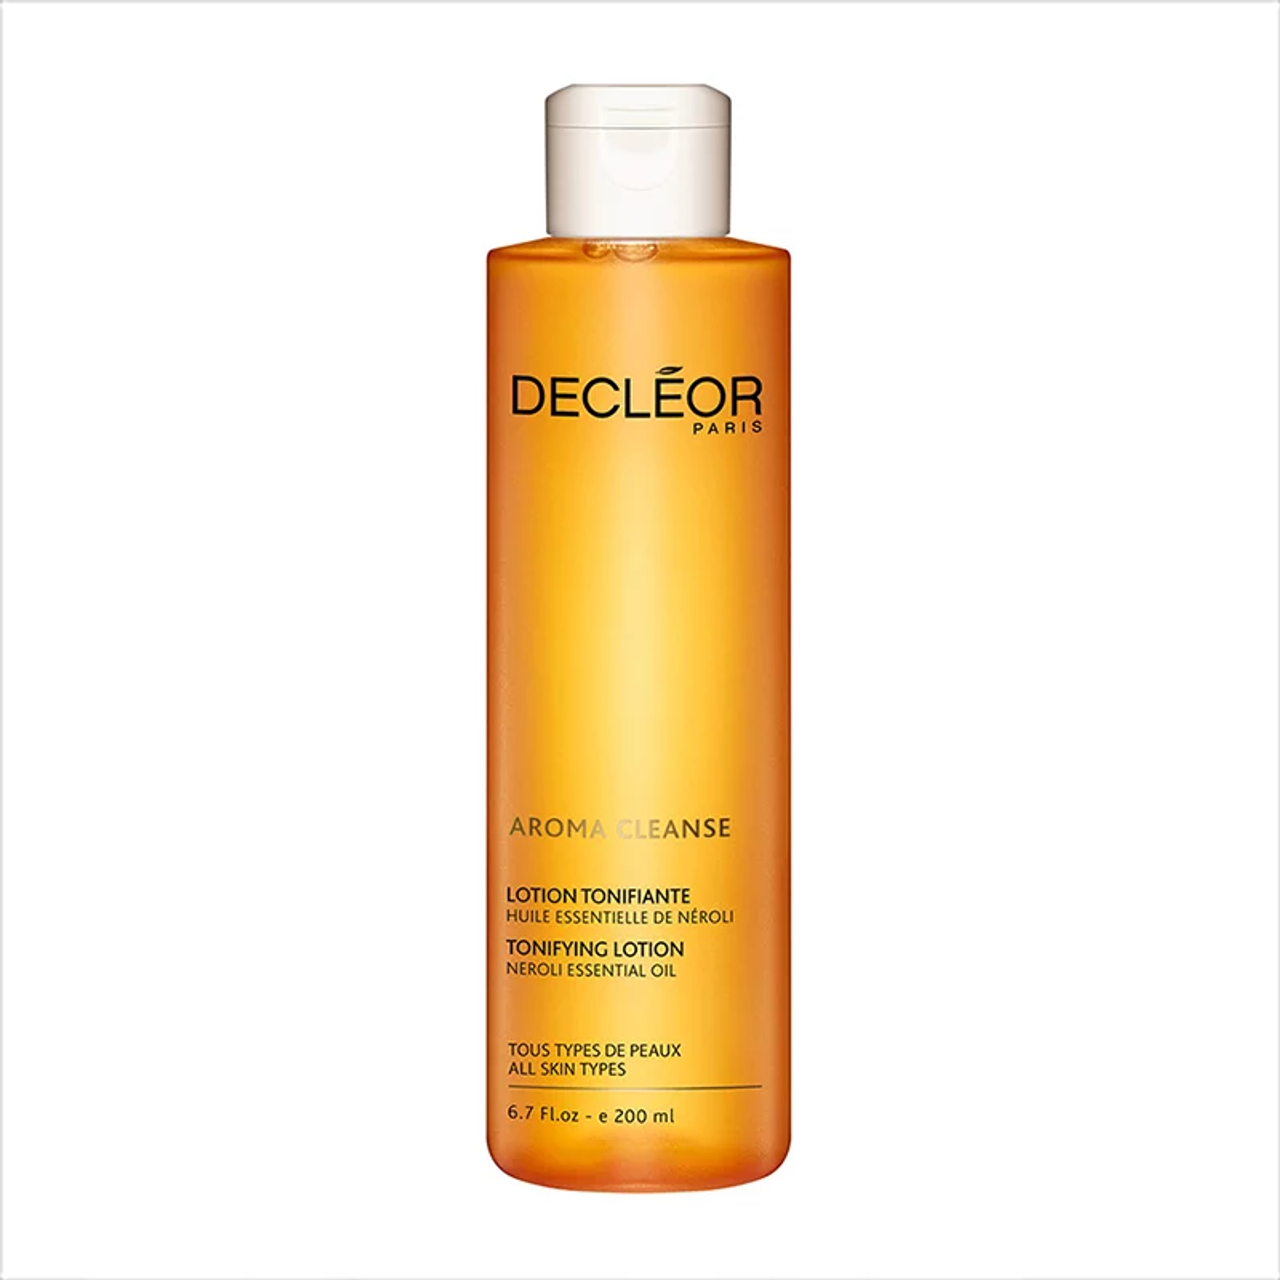 Decleor Aroma Cleanse Tonifying Lotion | Beautyfeatures.ie